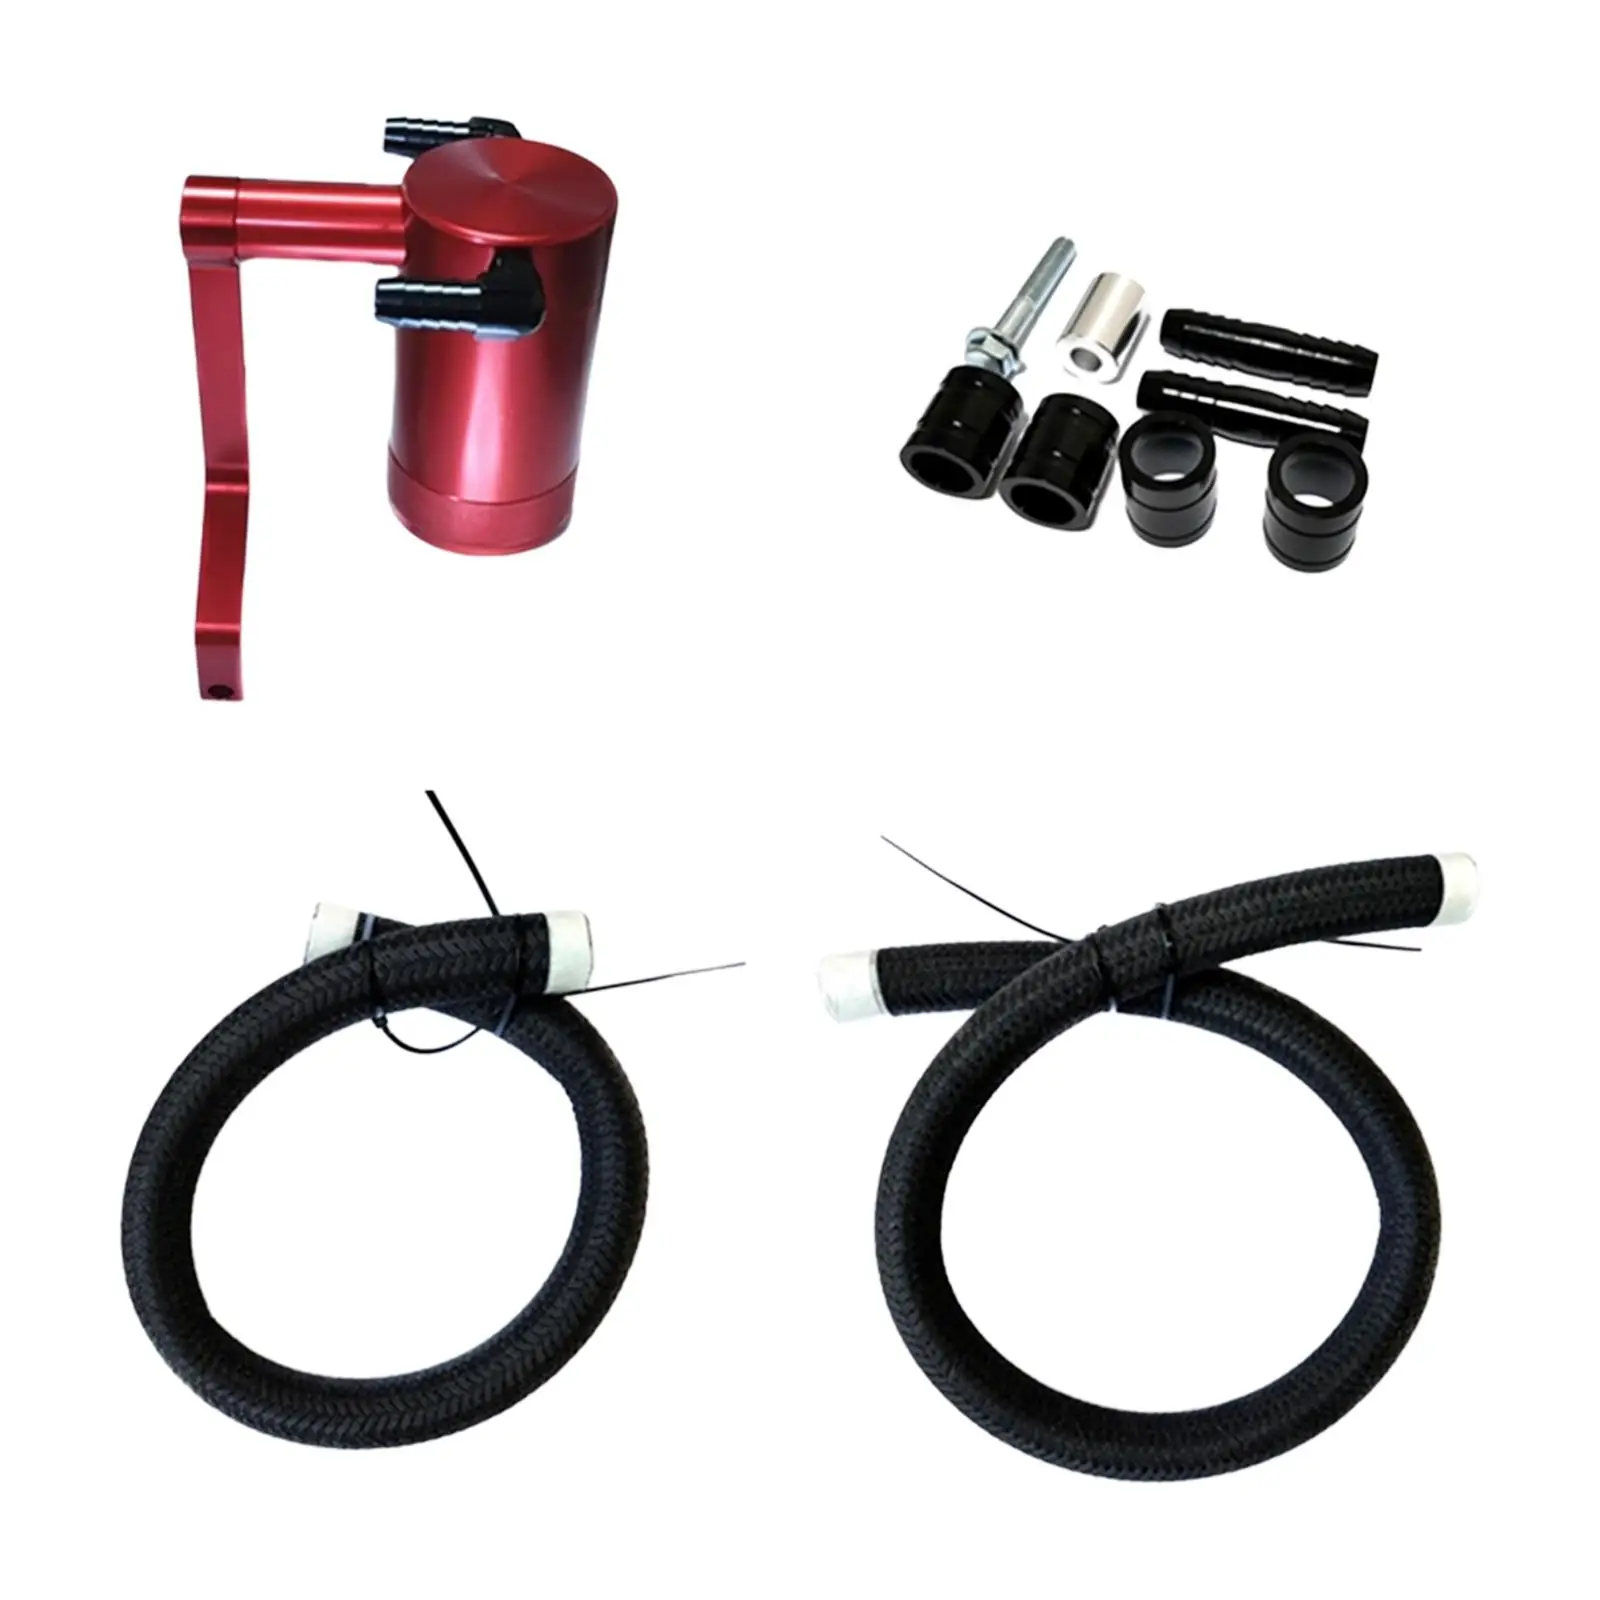 Oil Separator Catch Can Hemi Technology Z Bracket Accessories Replaces for Dodge